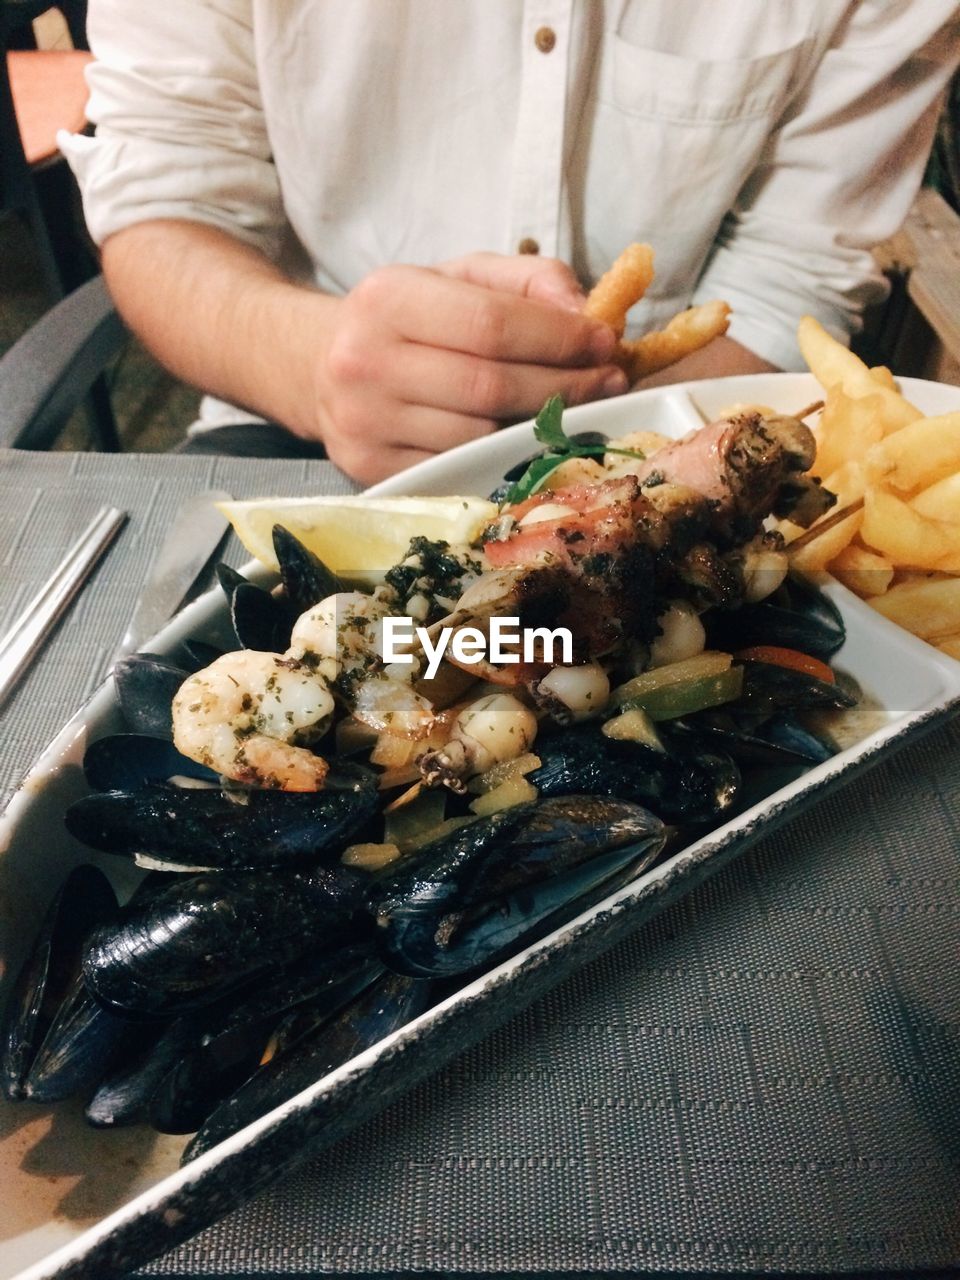 Mussels with prawns and fried fish served in front of man